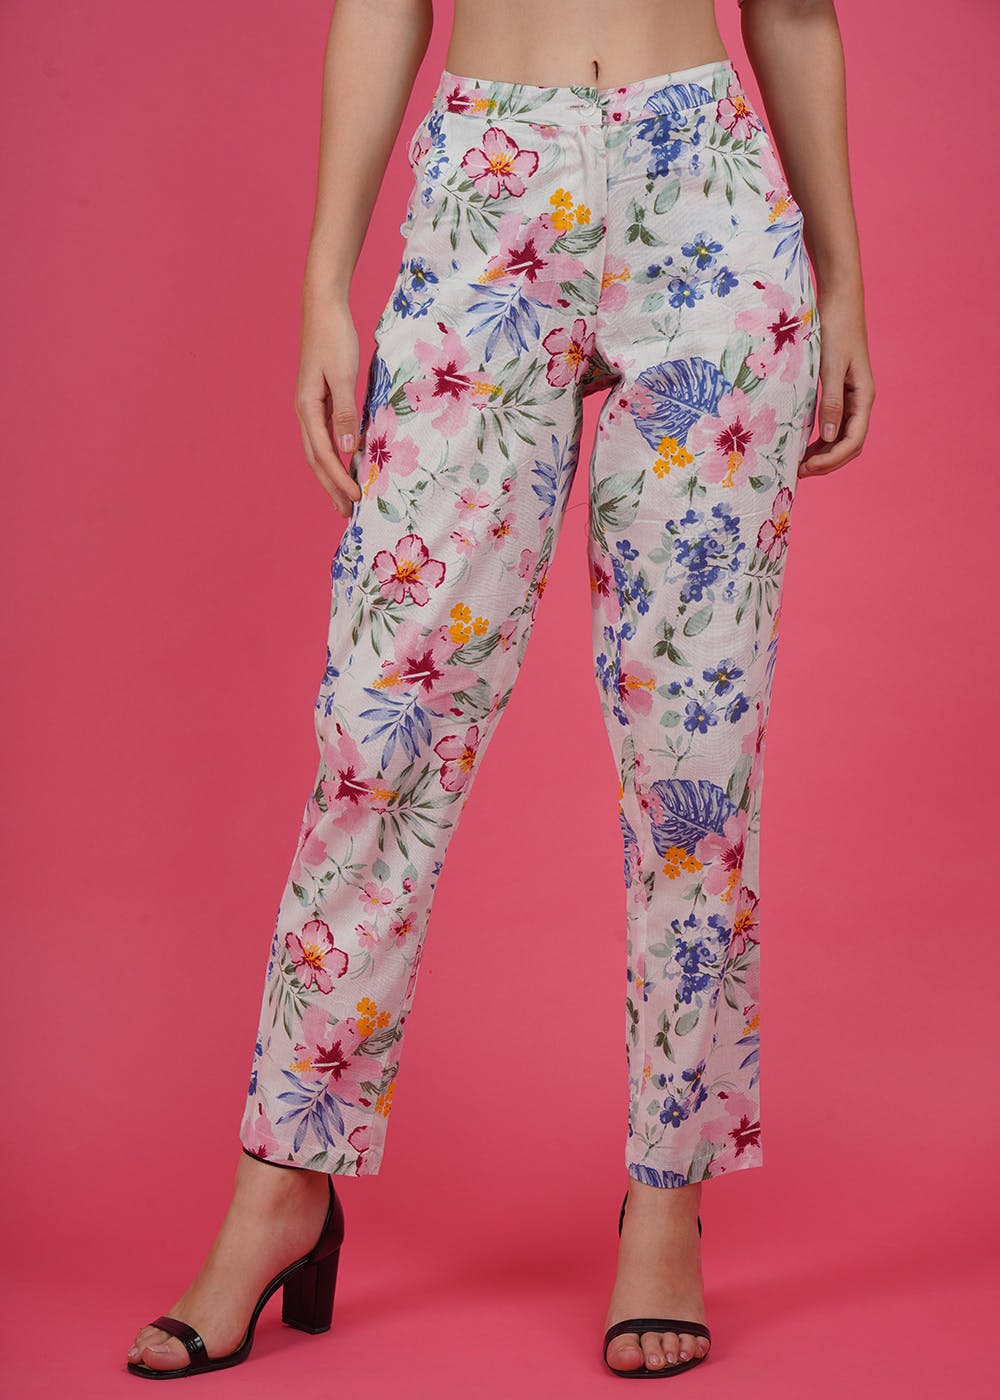 Get Floral Block Printed Straight Pants With Pockets at ₹ 1680 | LBB Shop